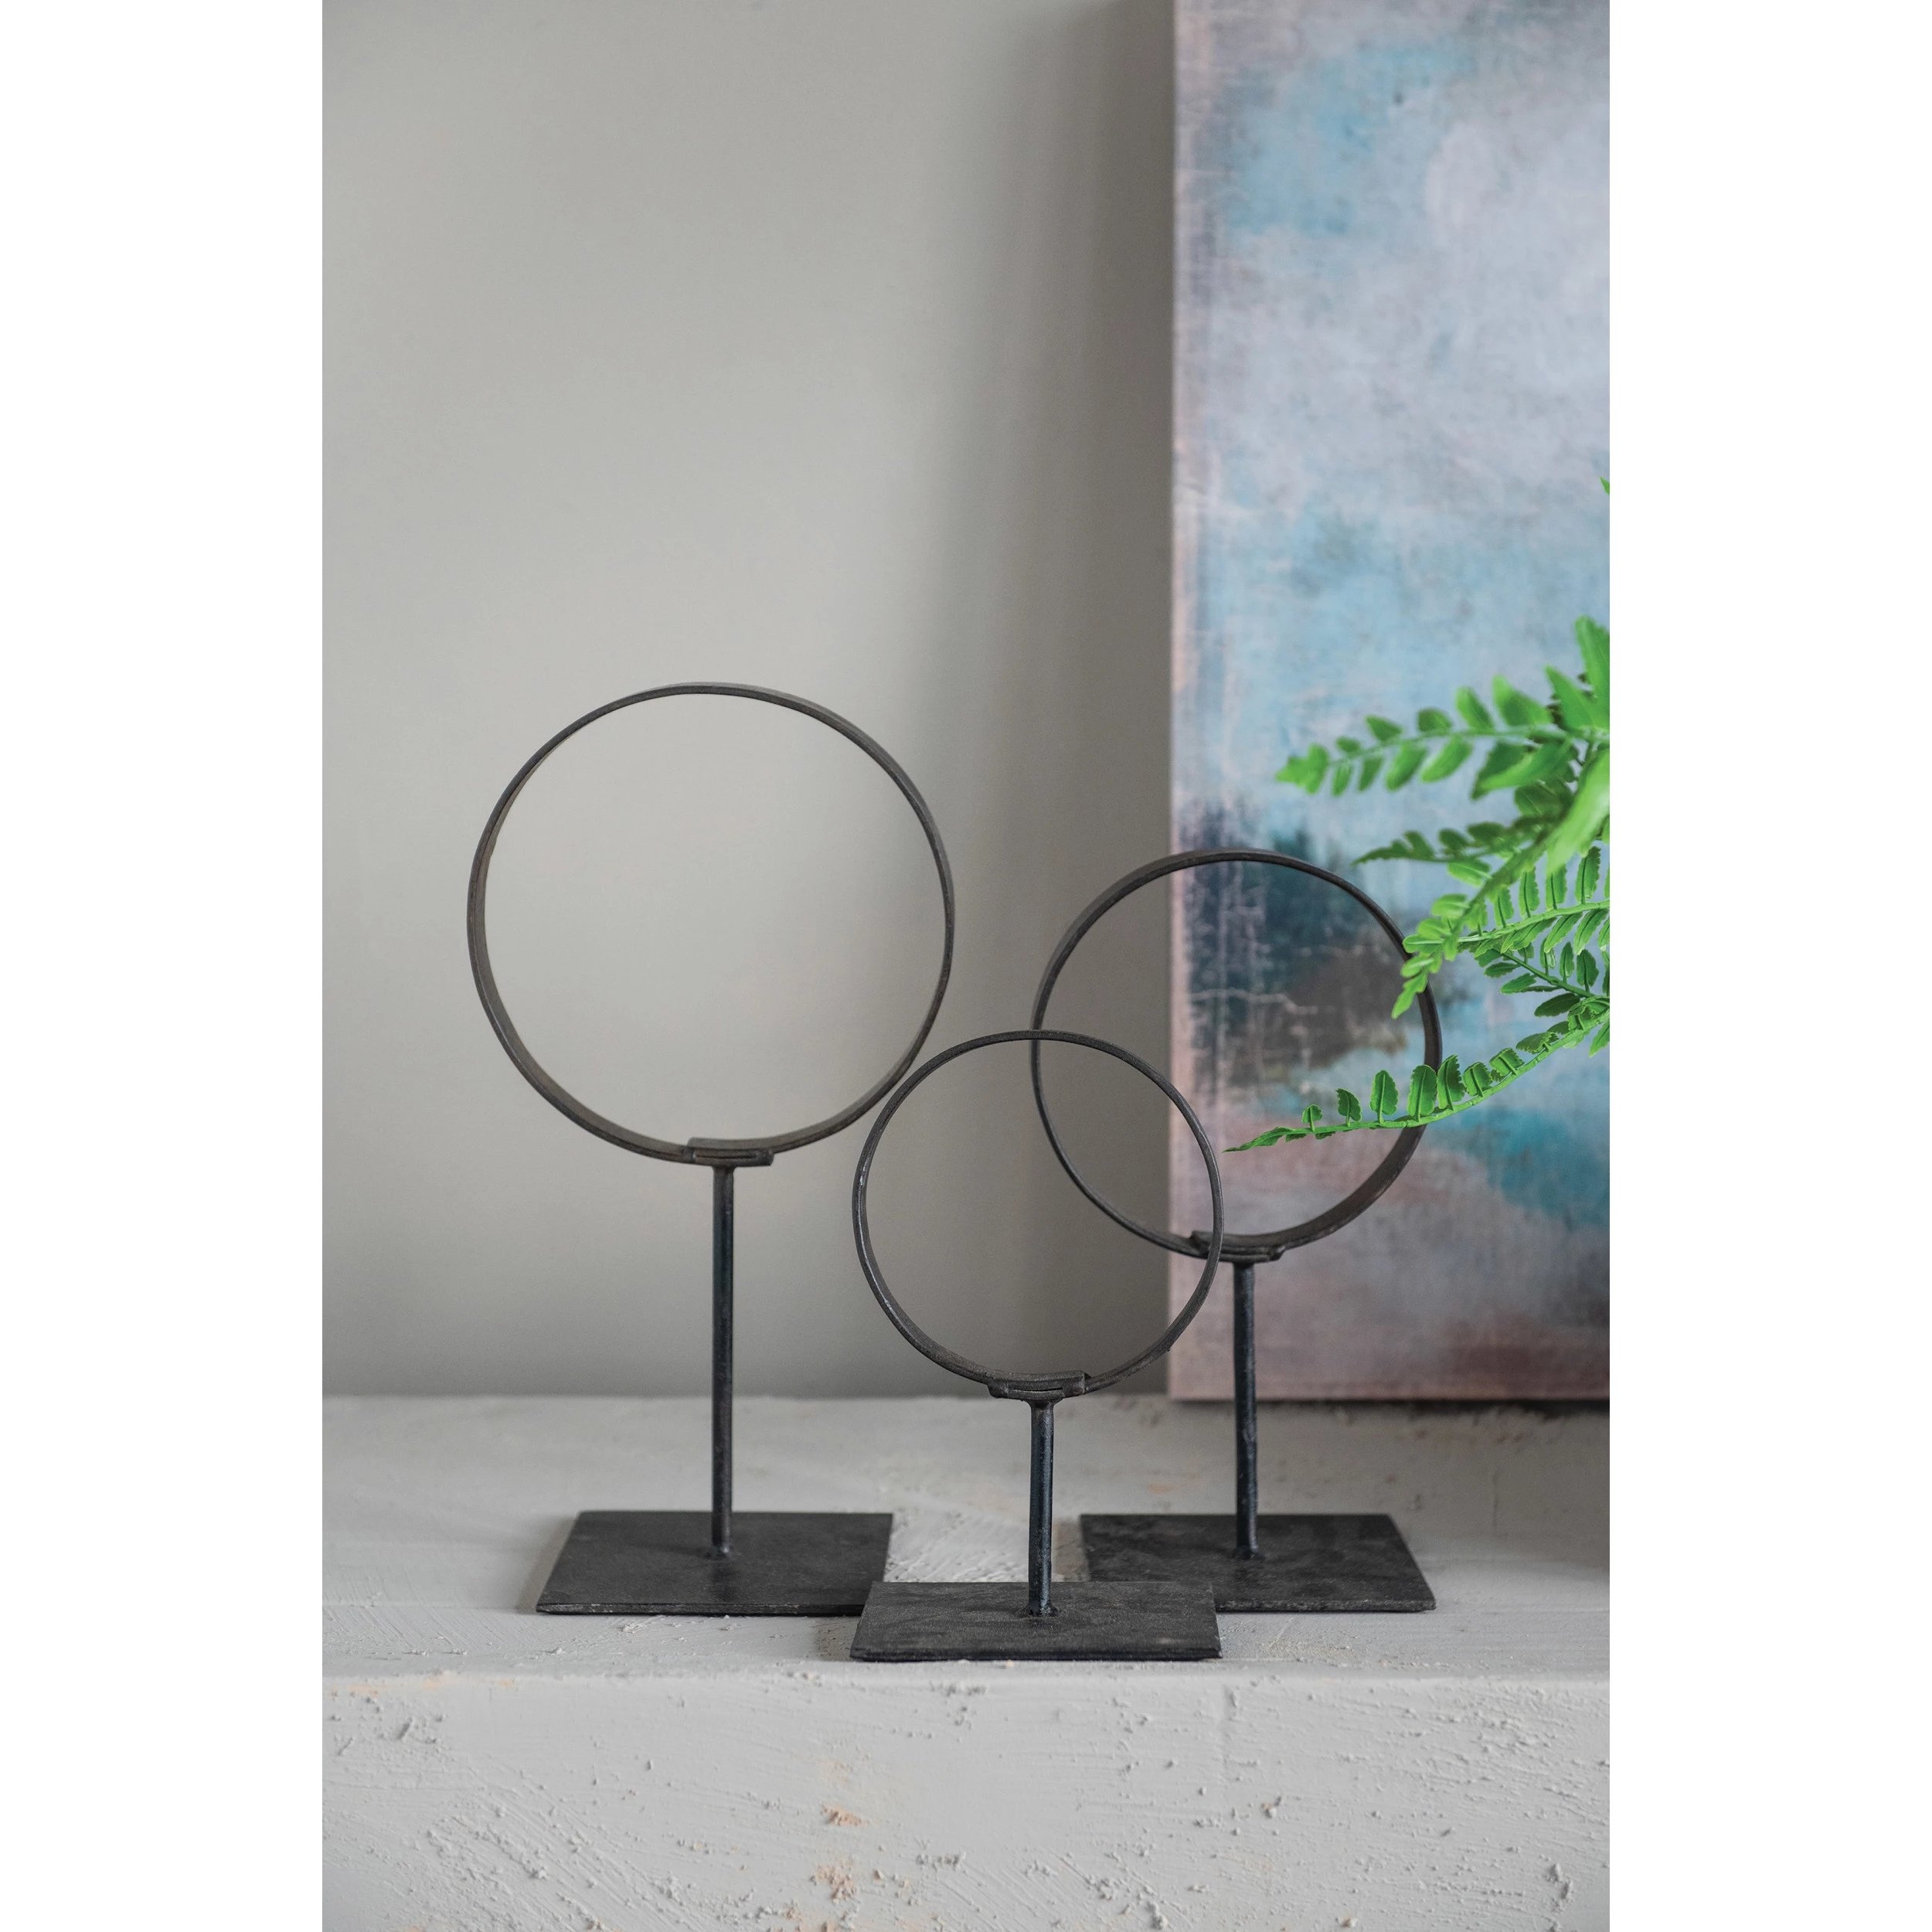 Decorative Modern Found Metal Rings on Stands, Set of 3 - Image 1